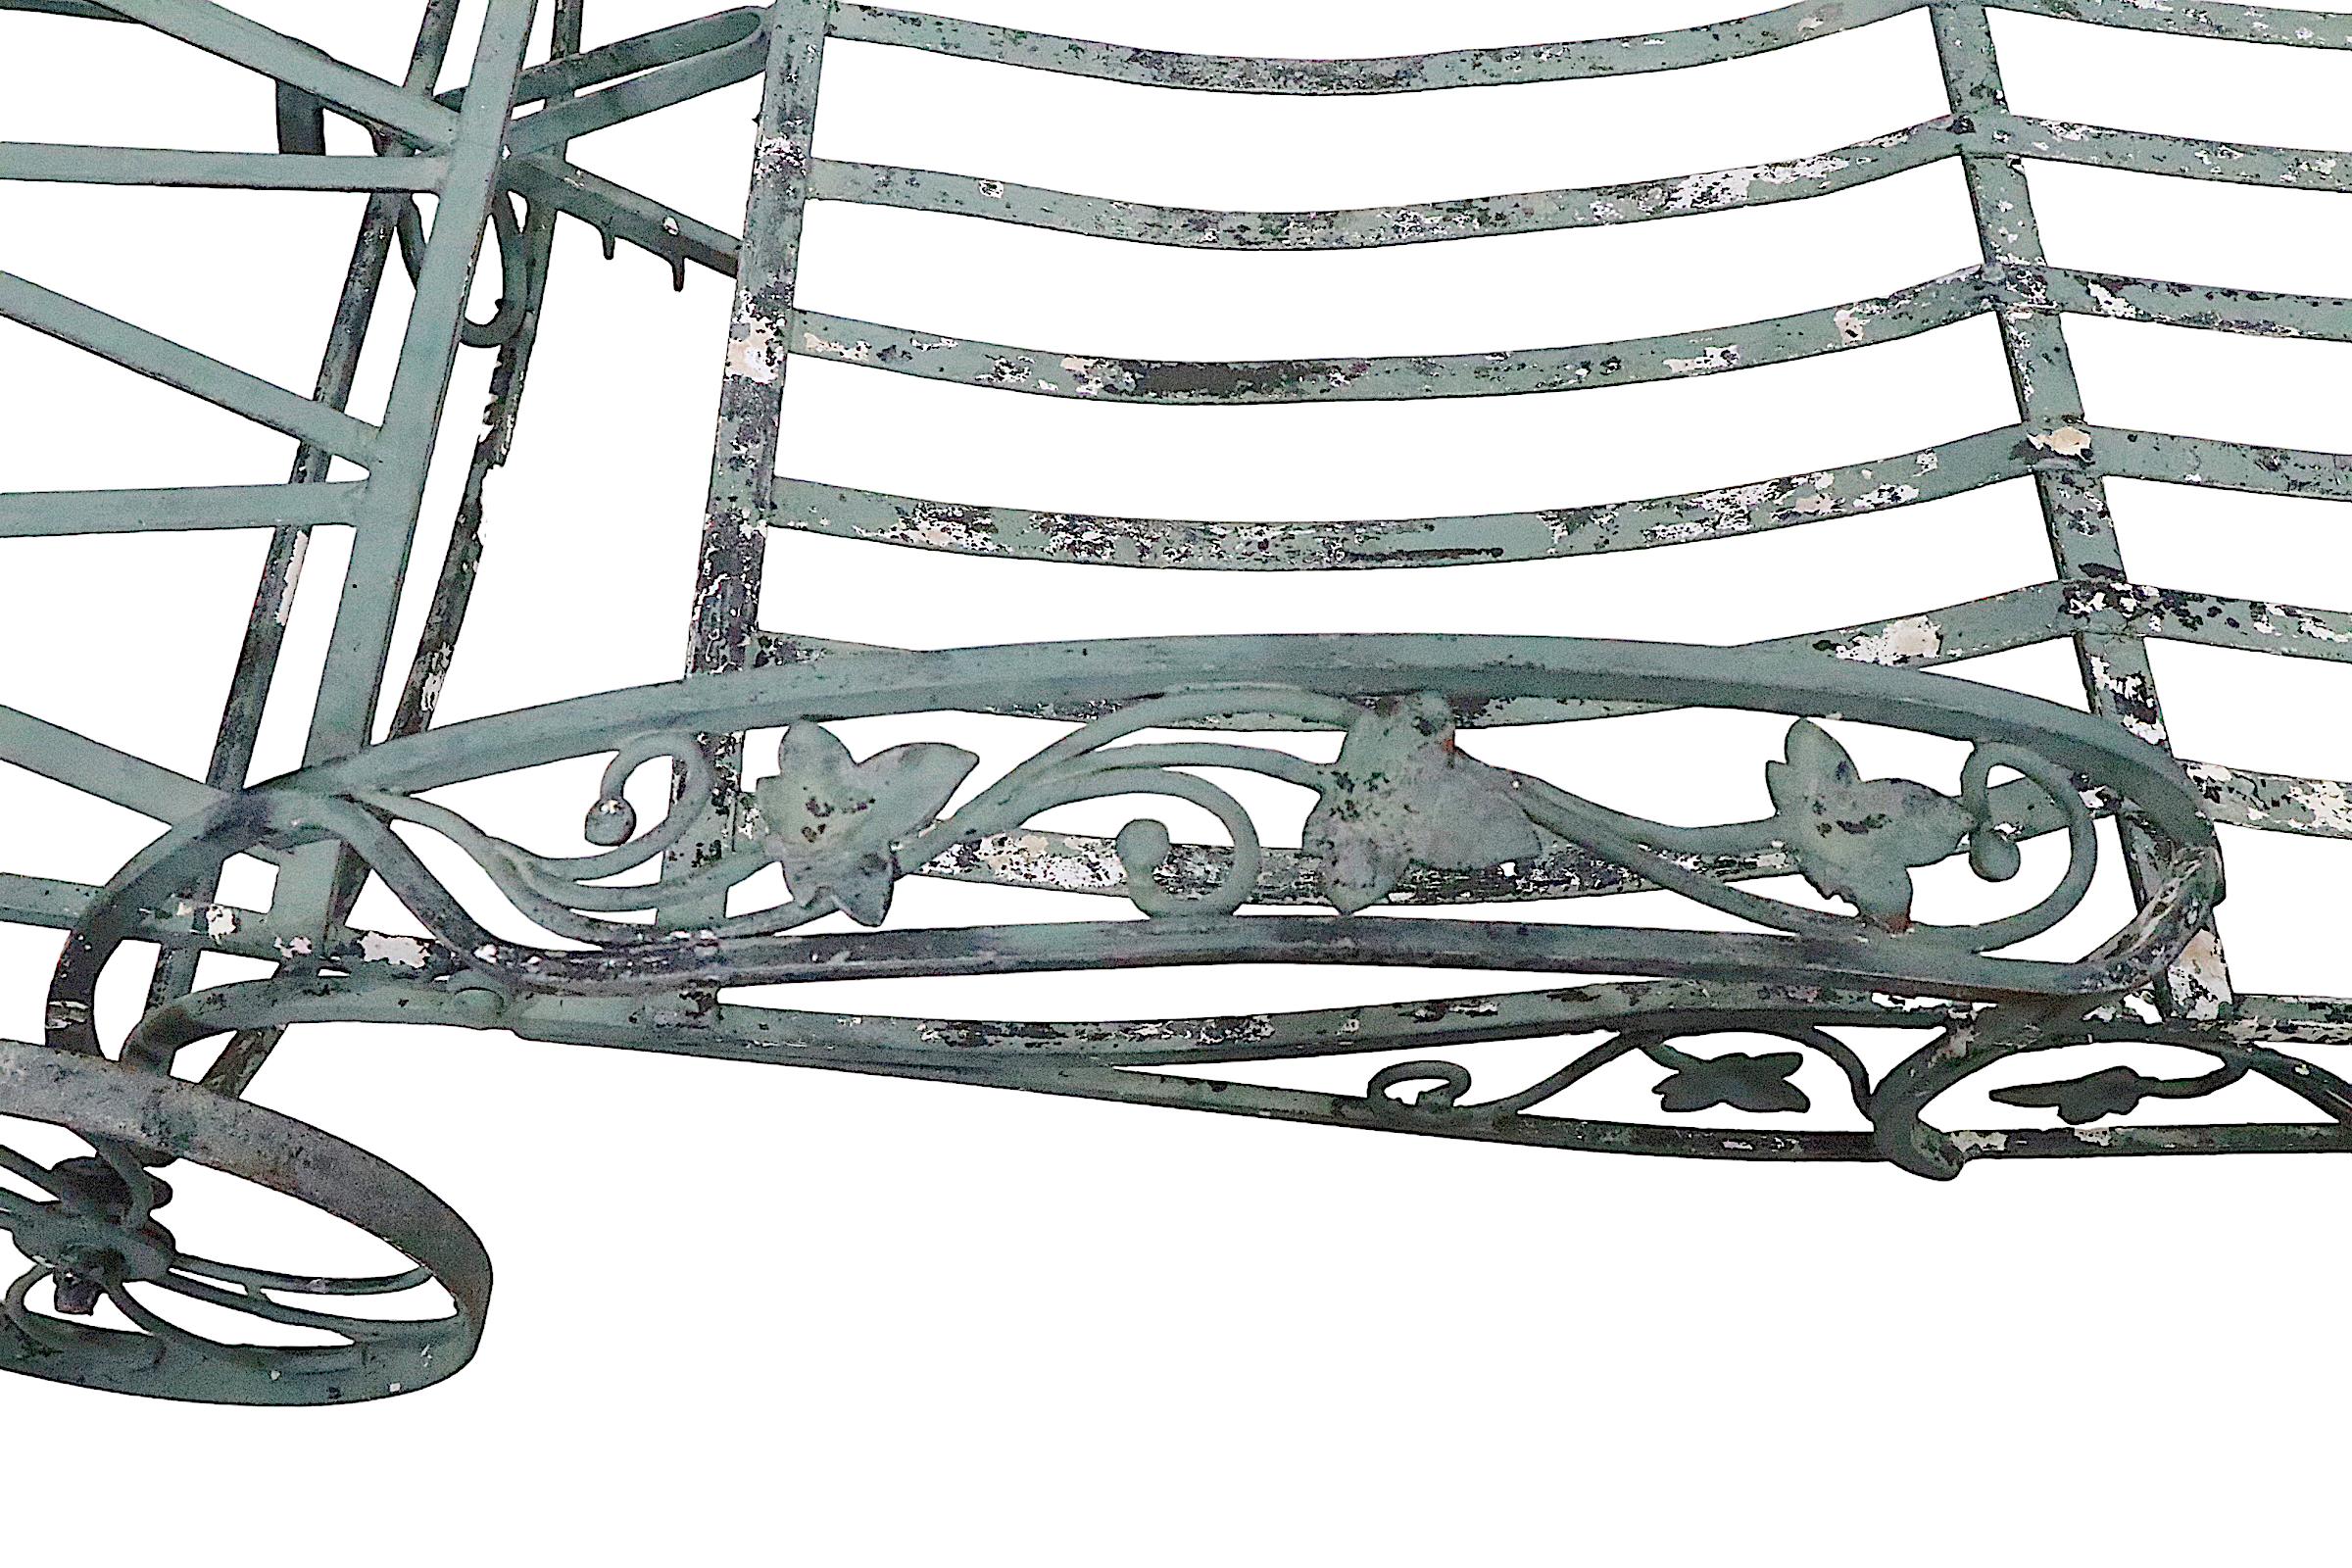  Wrought Iron Garden Patio  Double Wide Reclining Chaise Lounge by Salterini  10